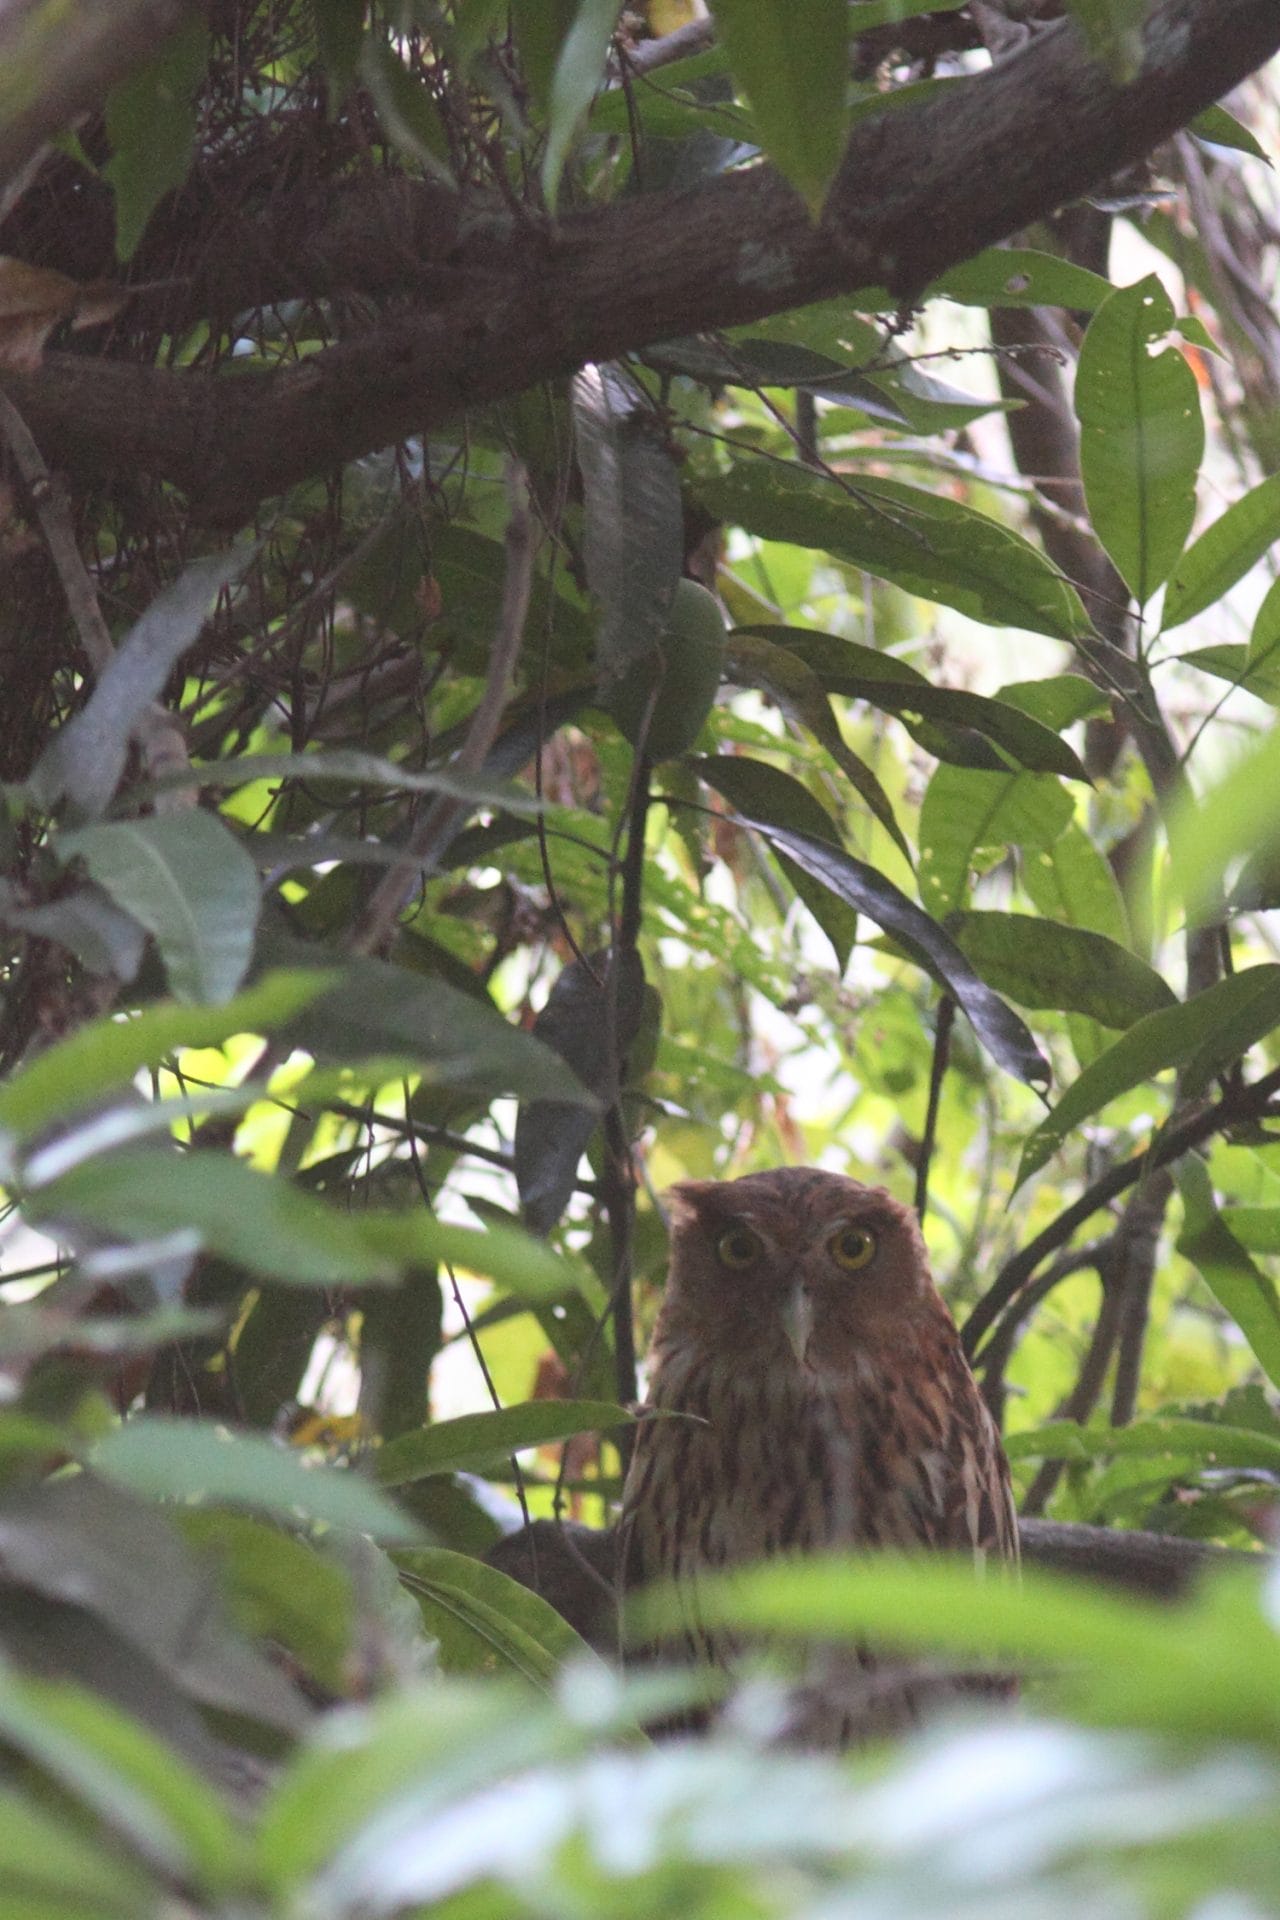 My first view of a Philippine Eagle-Owl roosting in a shady mango tree. I almost had to stand on tiptoes to photograph this bird over the leaves.